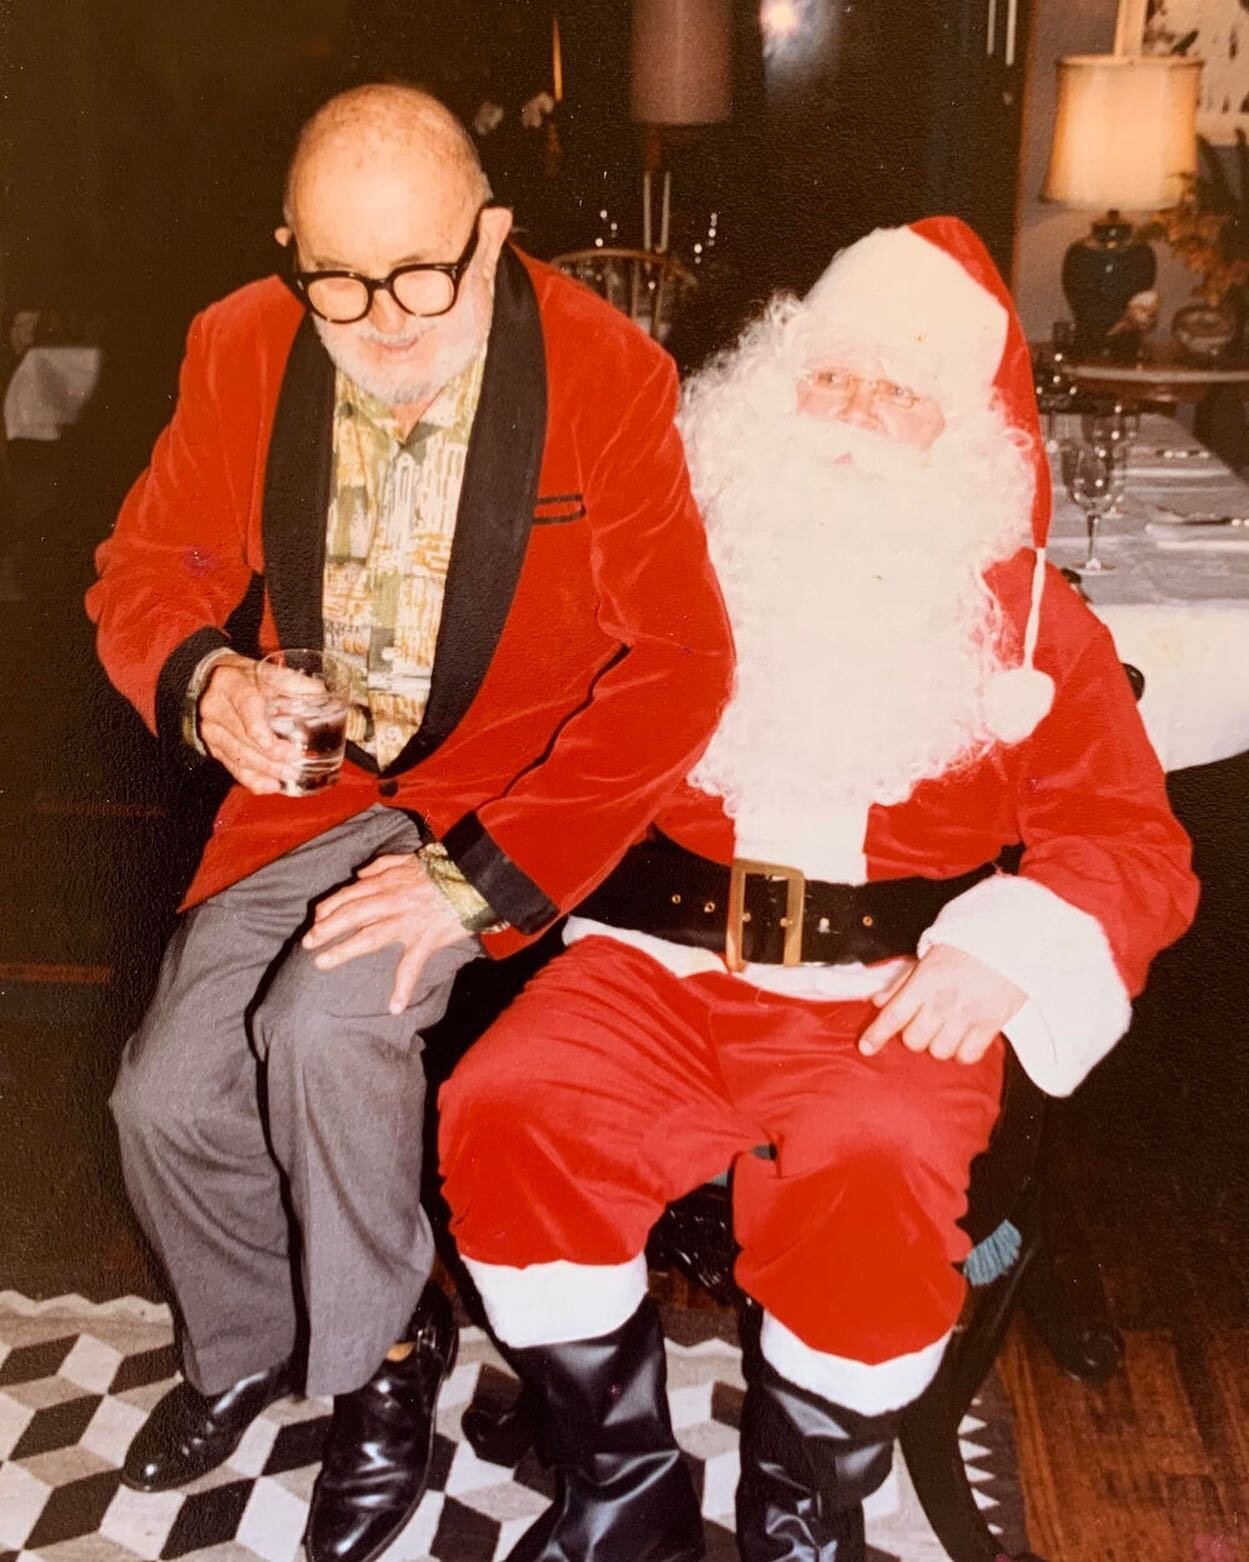 Happy Holidays! This year, we&rsquo;ve opted to make our yearly donation in our client&rsquo;s name to our local food bank. In these unprecedented times, we wish you health, peace, love &amp; laughter. Photo of Ansel Adams &amp; Santa at mom&rsquo;s 